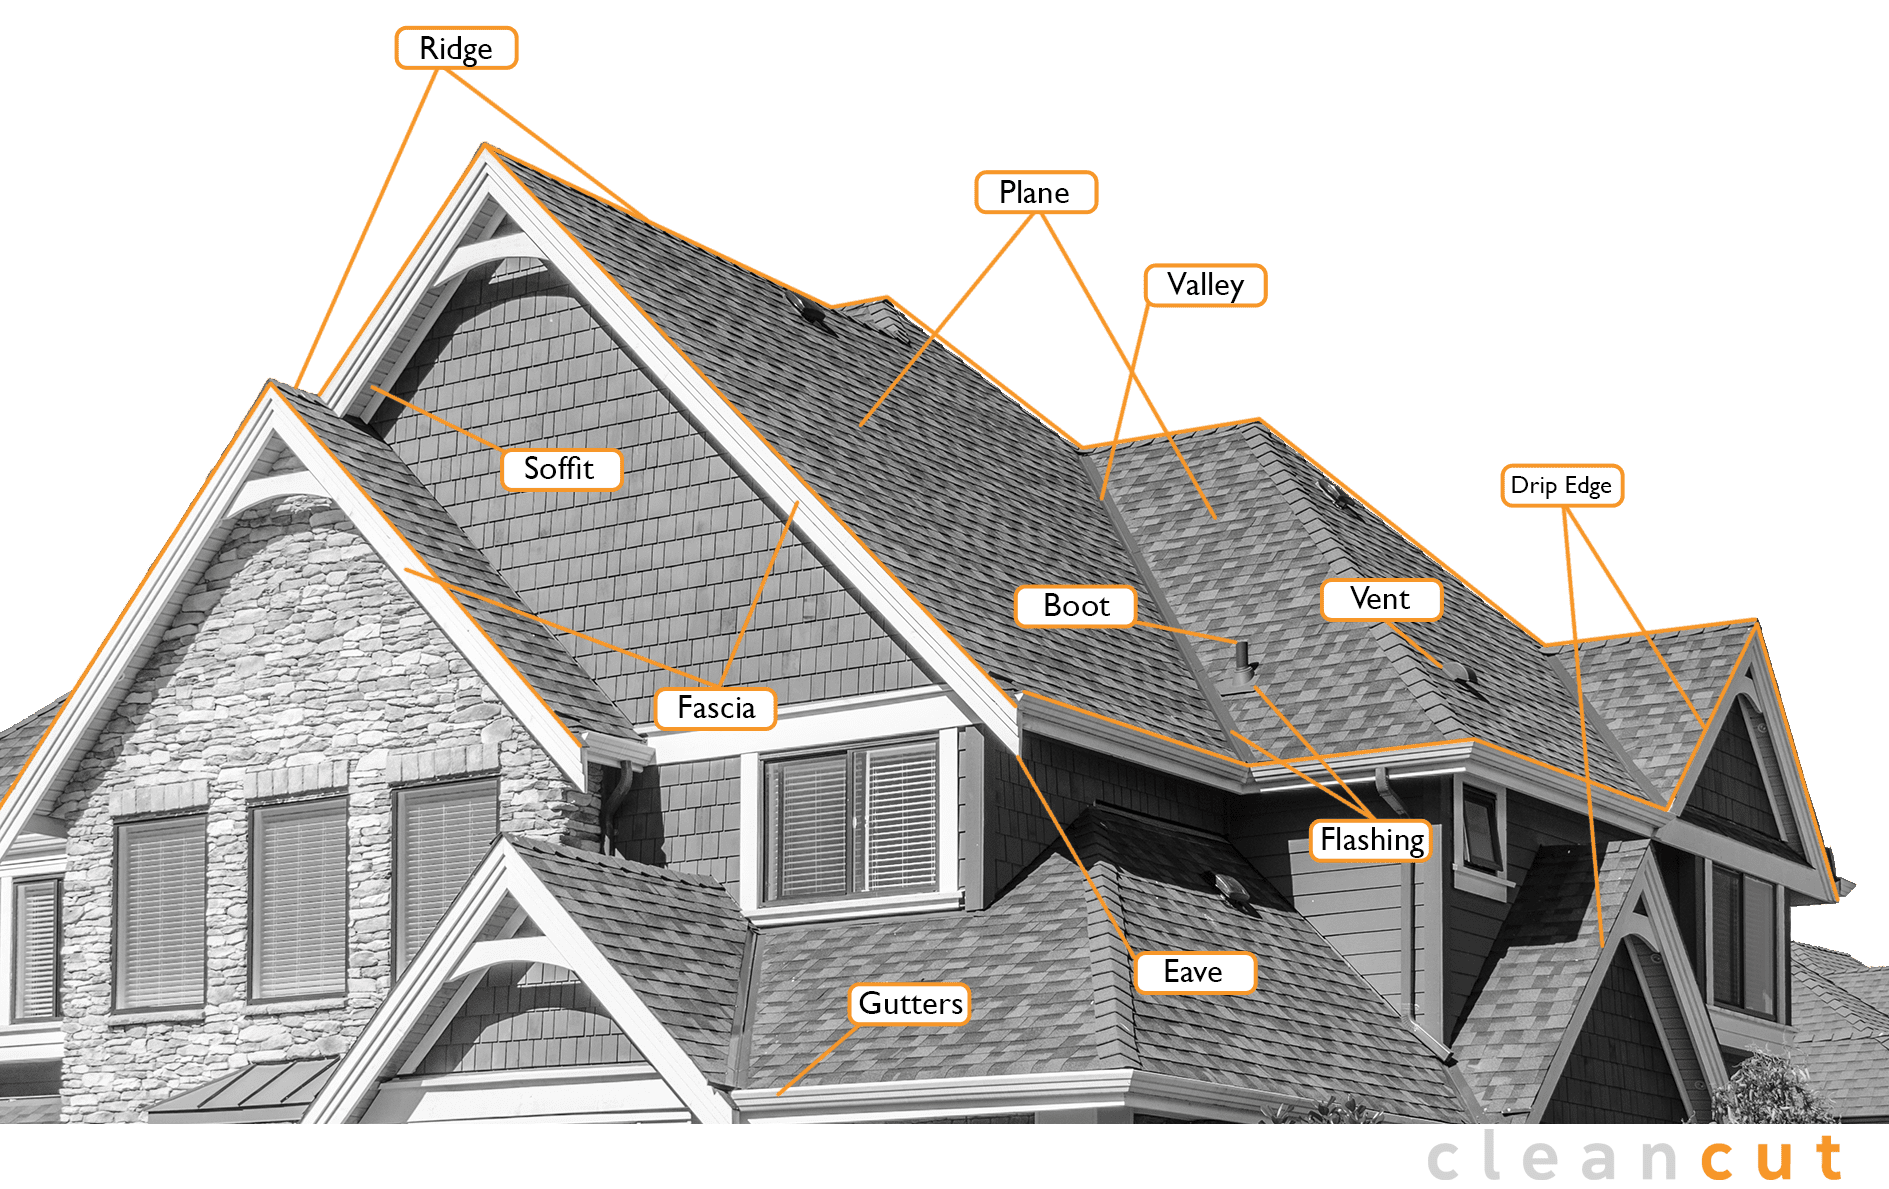 parts of a roof labeled